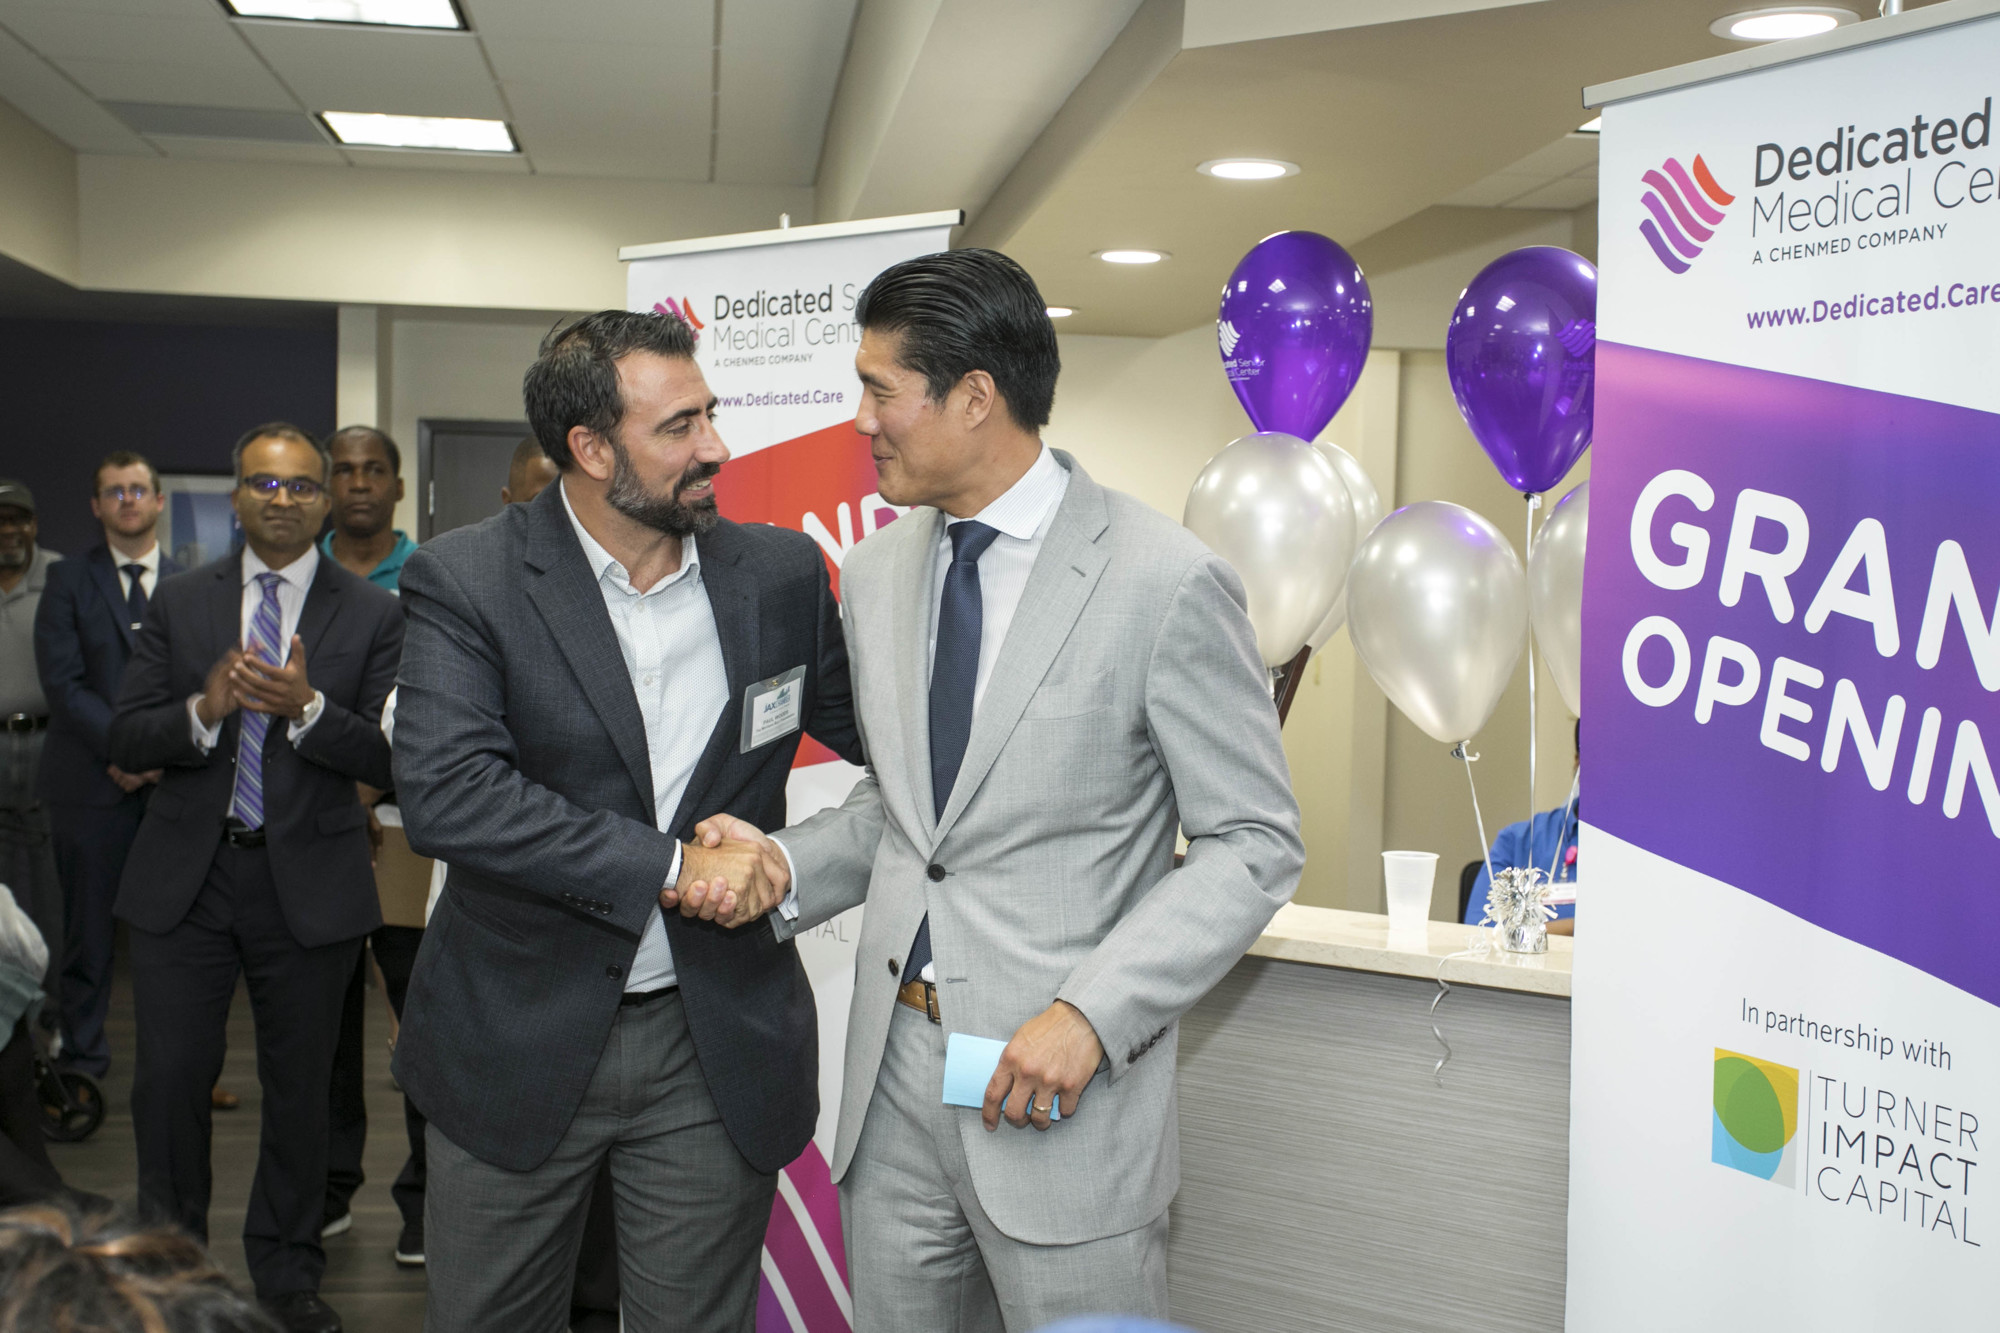 JAX Chamber representative Paul Woods greets ChenMed CEO Christopher Chen at the ribbon-cutting Thursday of the first of three ChenMed Dedicated Senior Medical Centers in Jacksonville.